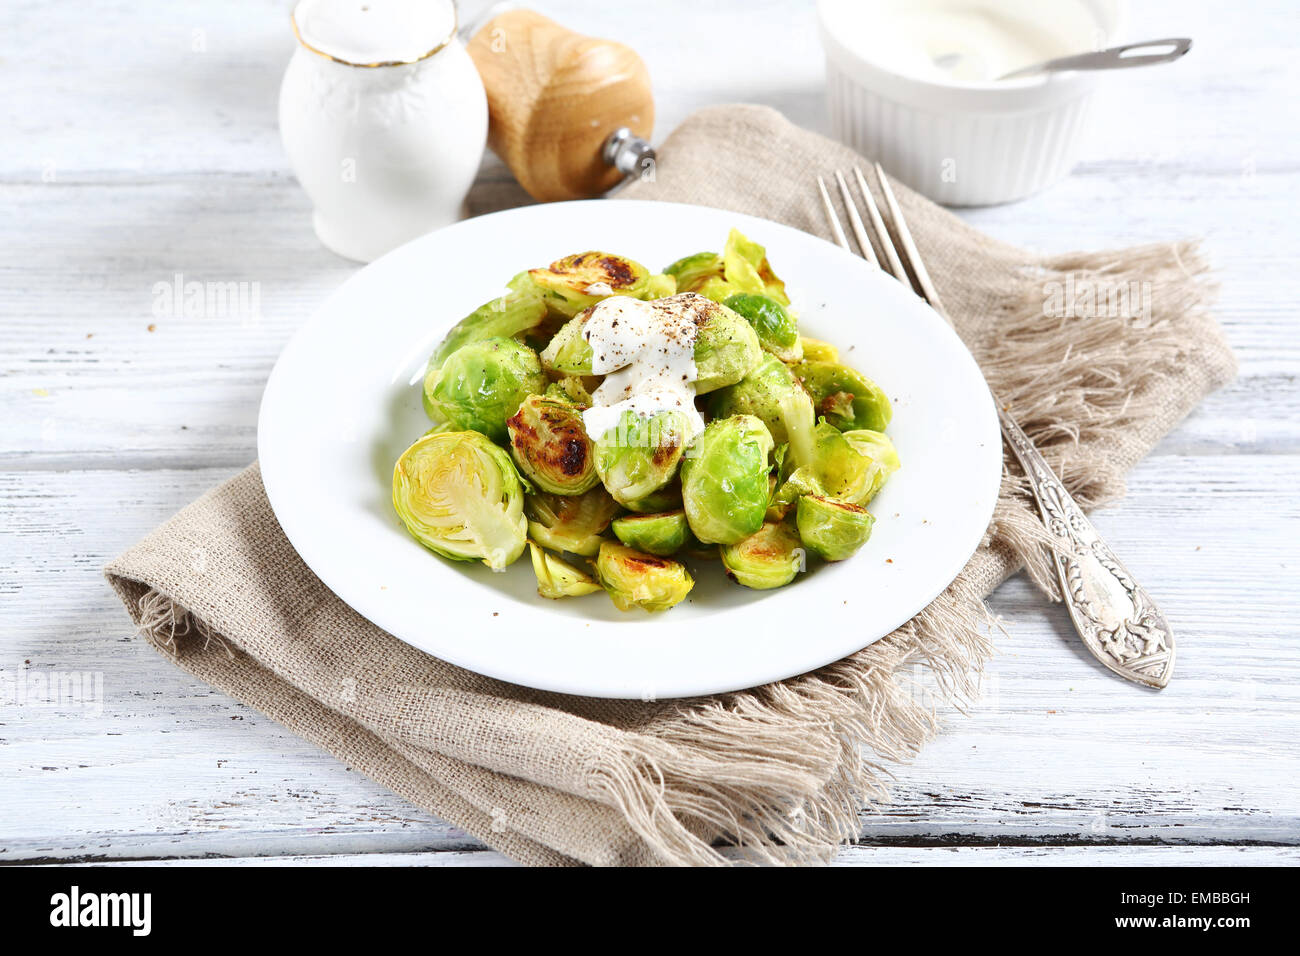 Brussels sprouts with sauce, food Stock Photo